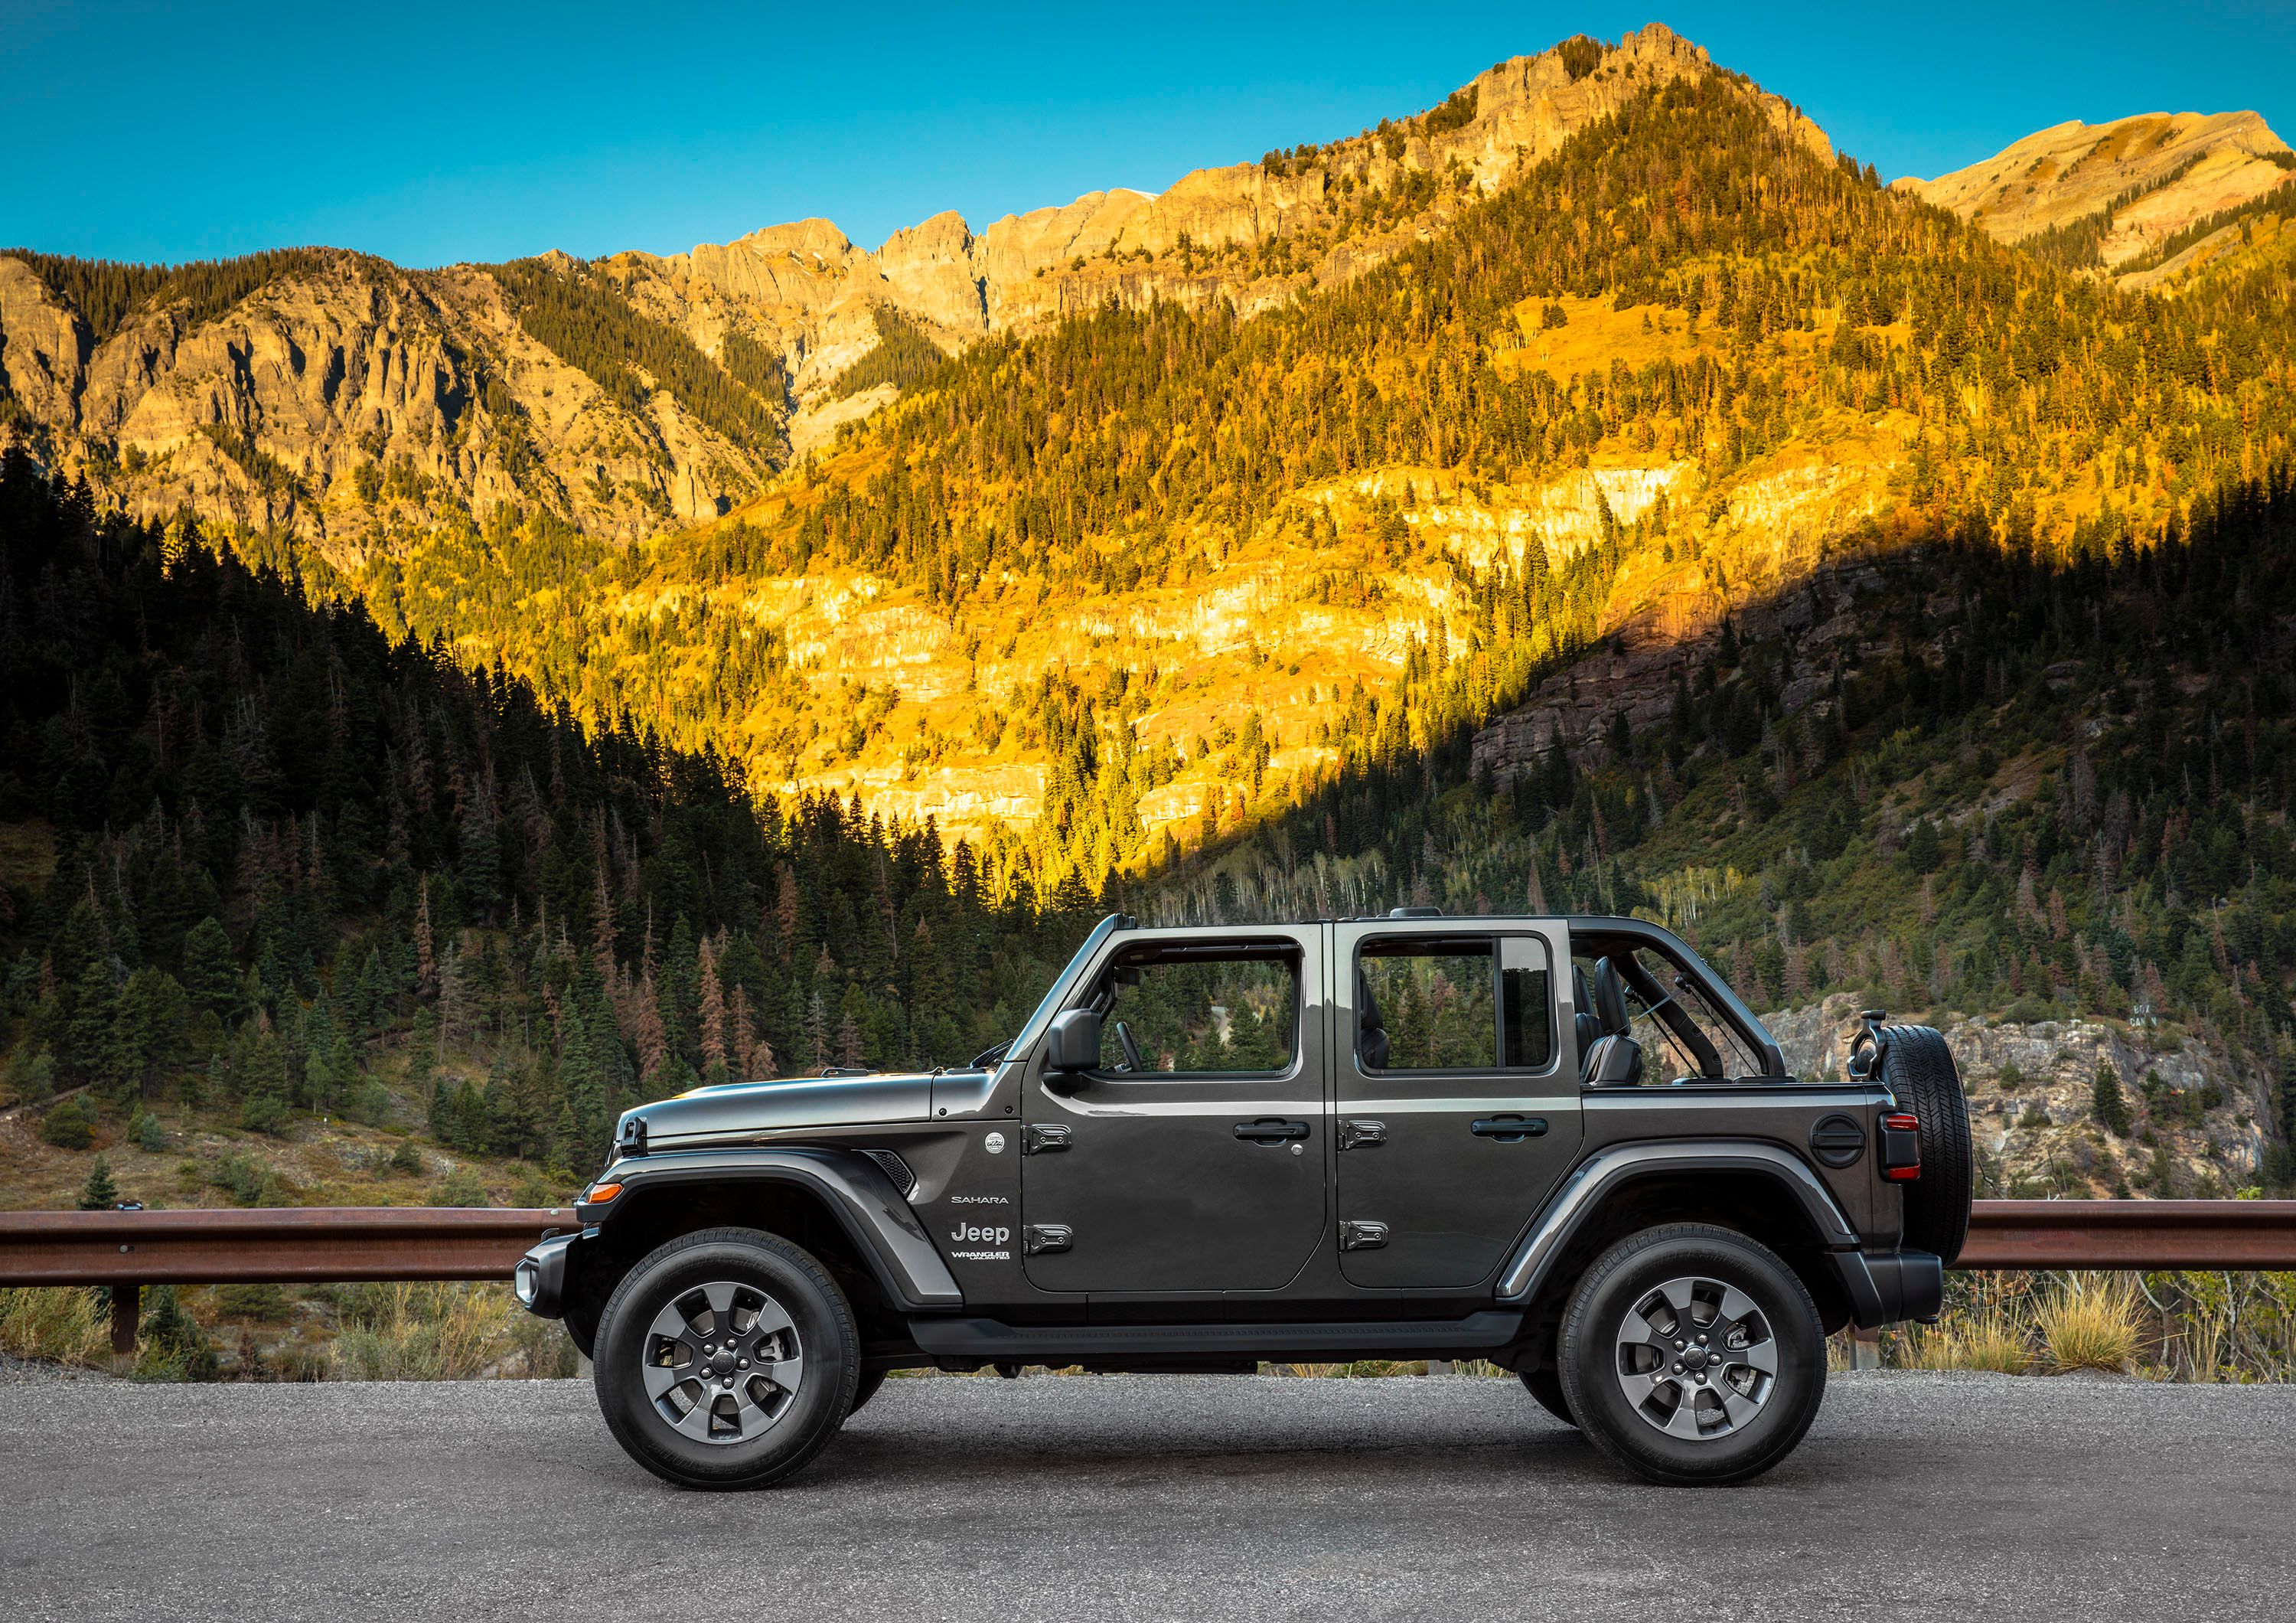 2020 Jeep's Design Boss Just Made a Bold Statement About a Wrangler EV - Do You Agree?